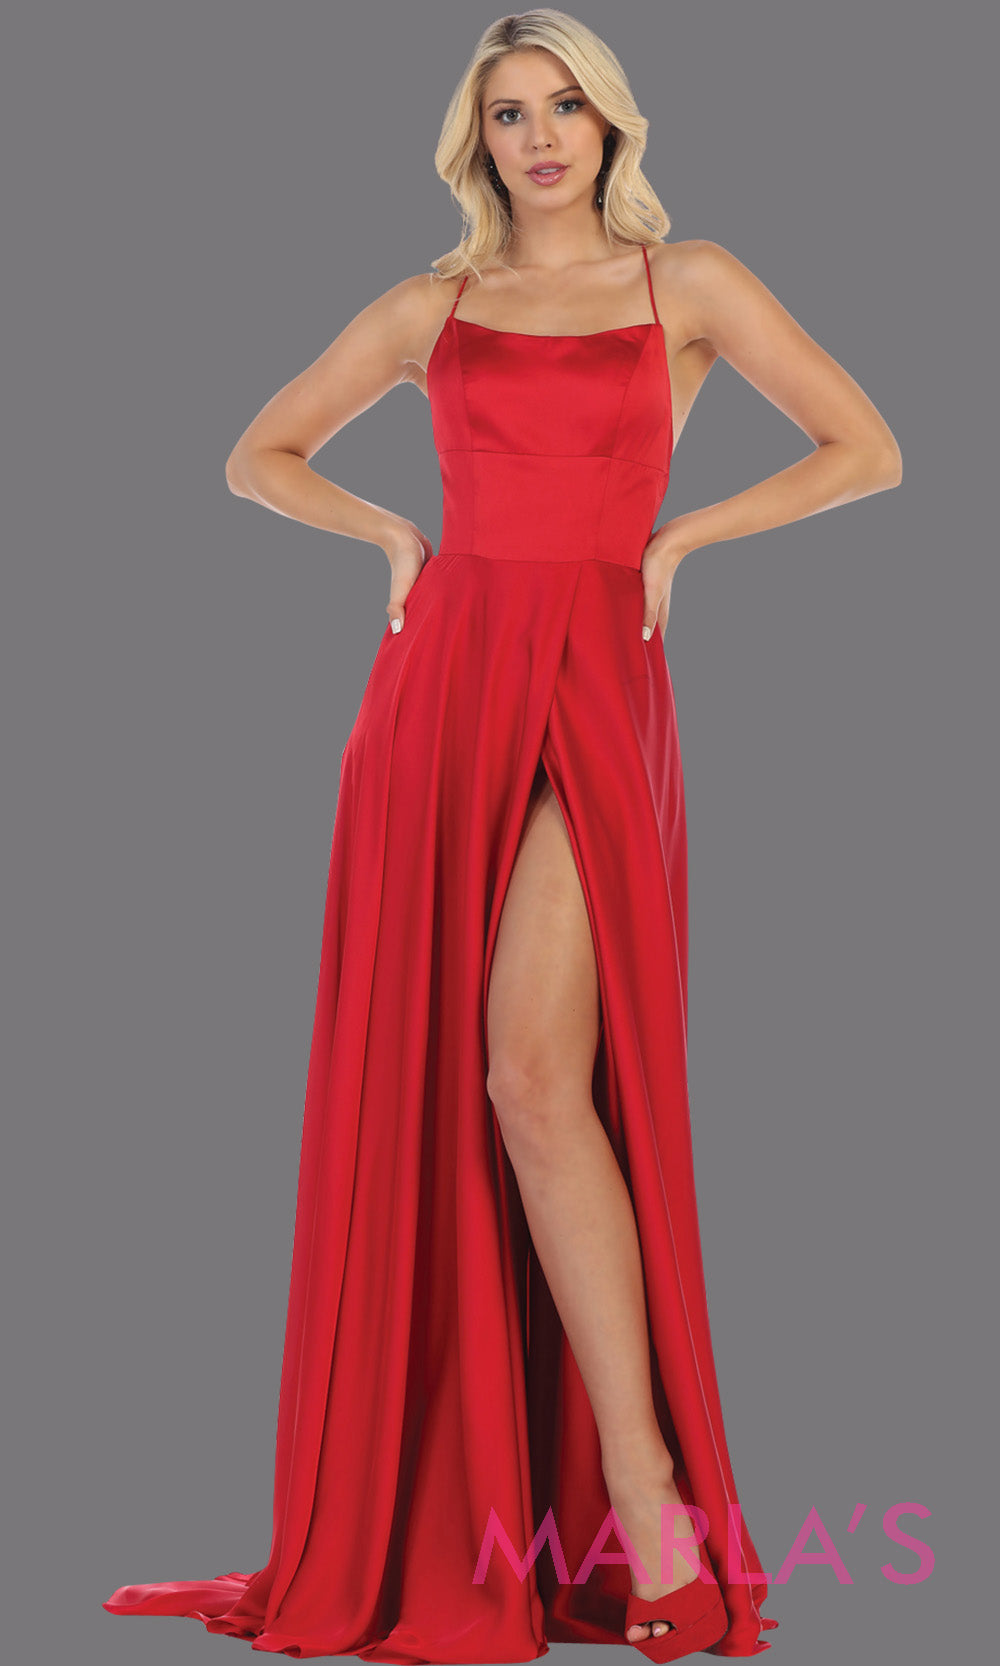 Long red satin dress with high slit & criss cross back. This simple & sexy red dress from mayqueen is perfect for prom, bridesmaids, engagement dress, engagement photoshoot, eshoot, plus size party dress, red gala gown, wedding guest dress